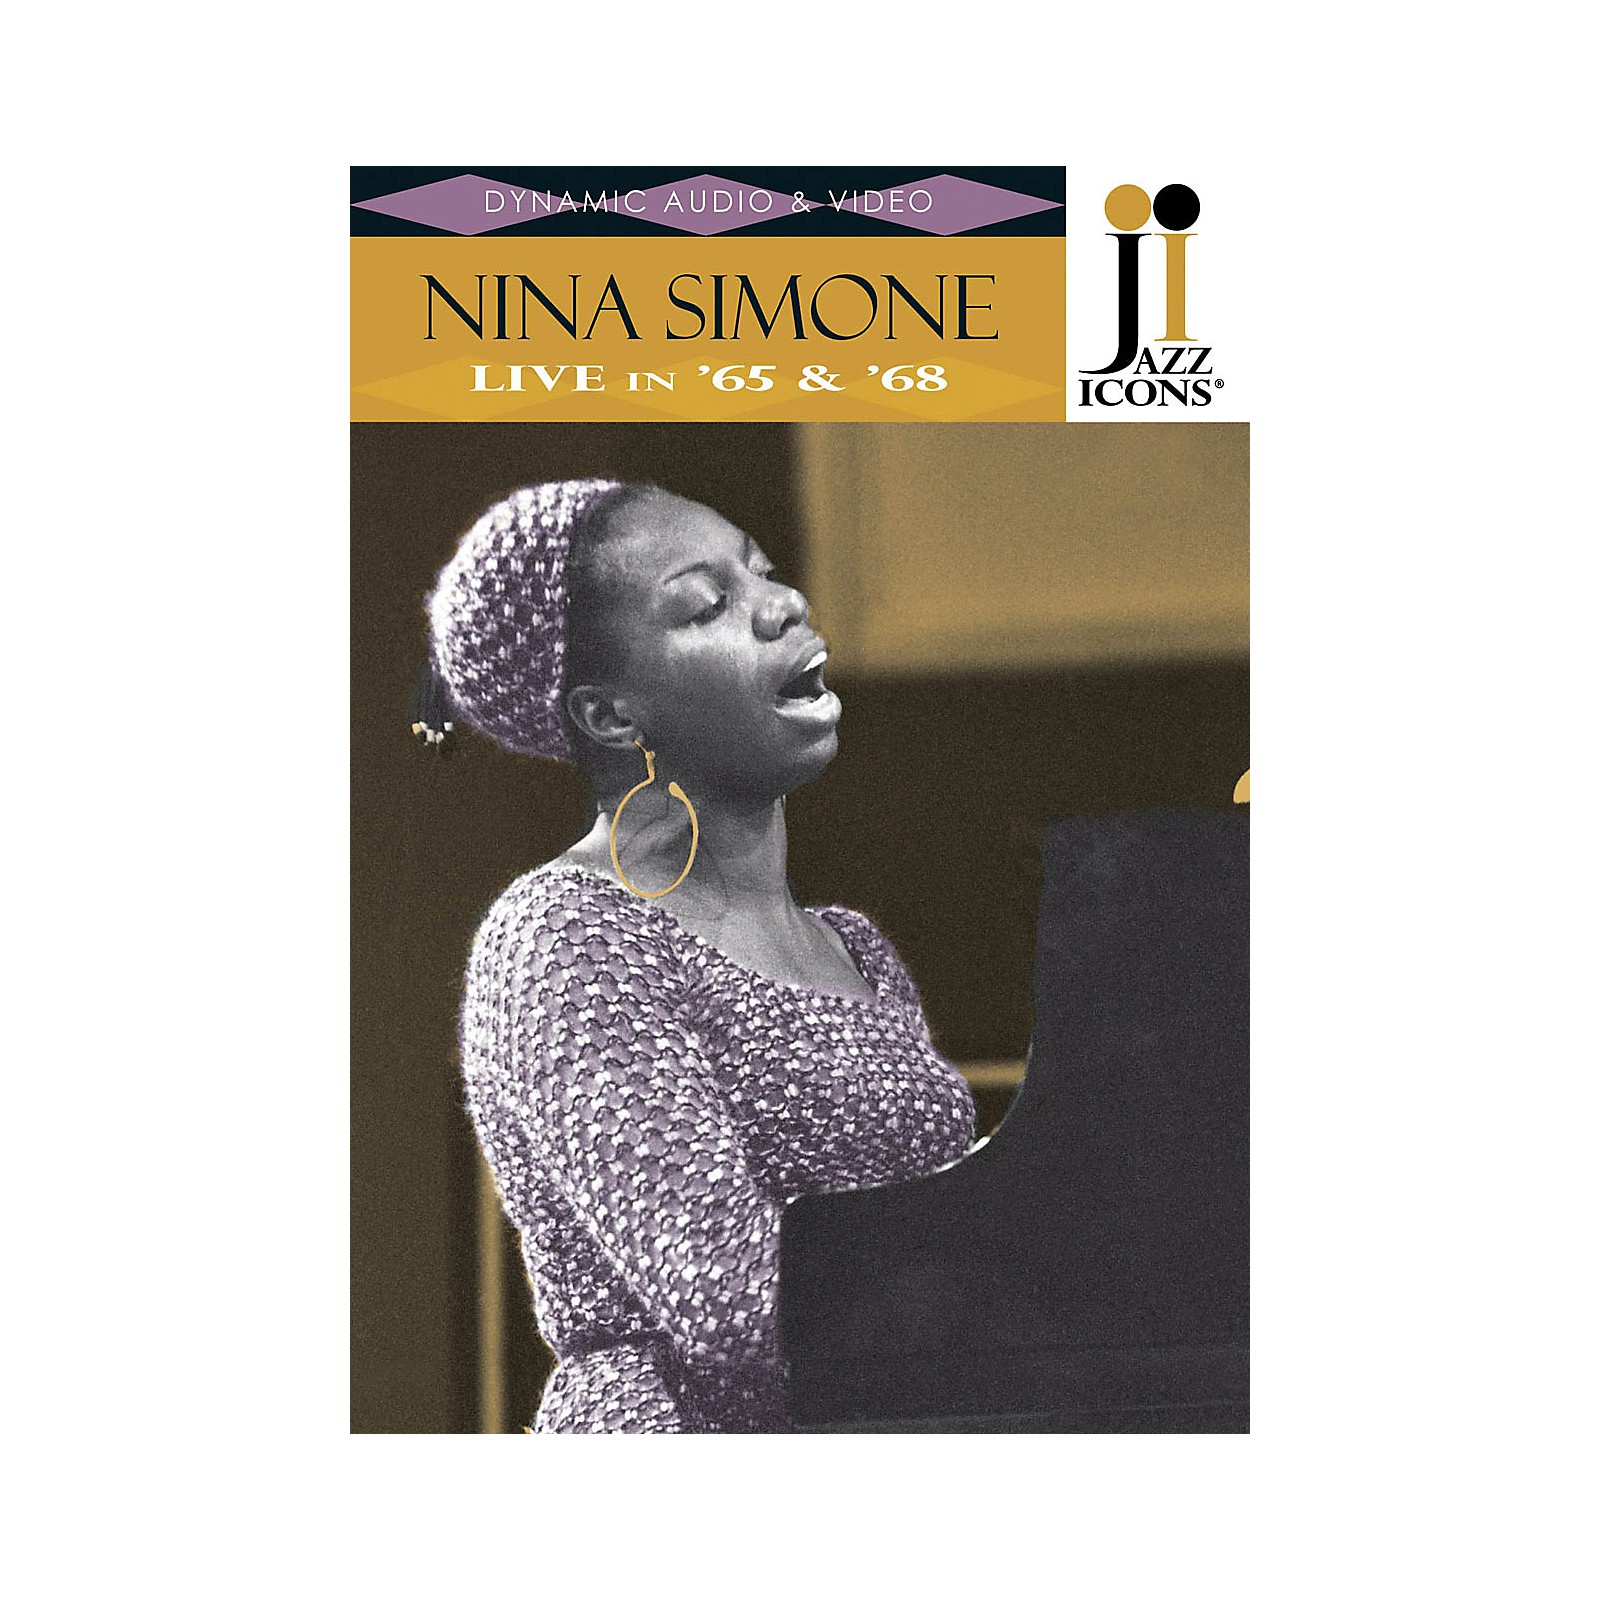 Jazz Icons Nina Simone Live In 65 68 Jazz Icons Dvd Live Dvd Series Dvd Performed By Nina Simone Guitar Center